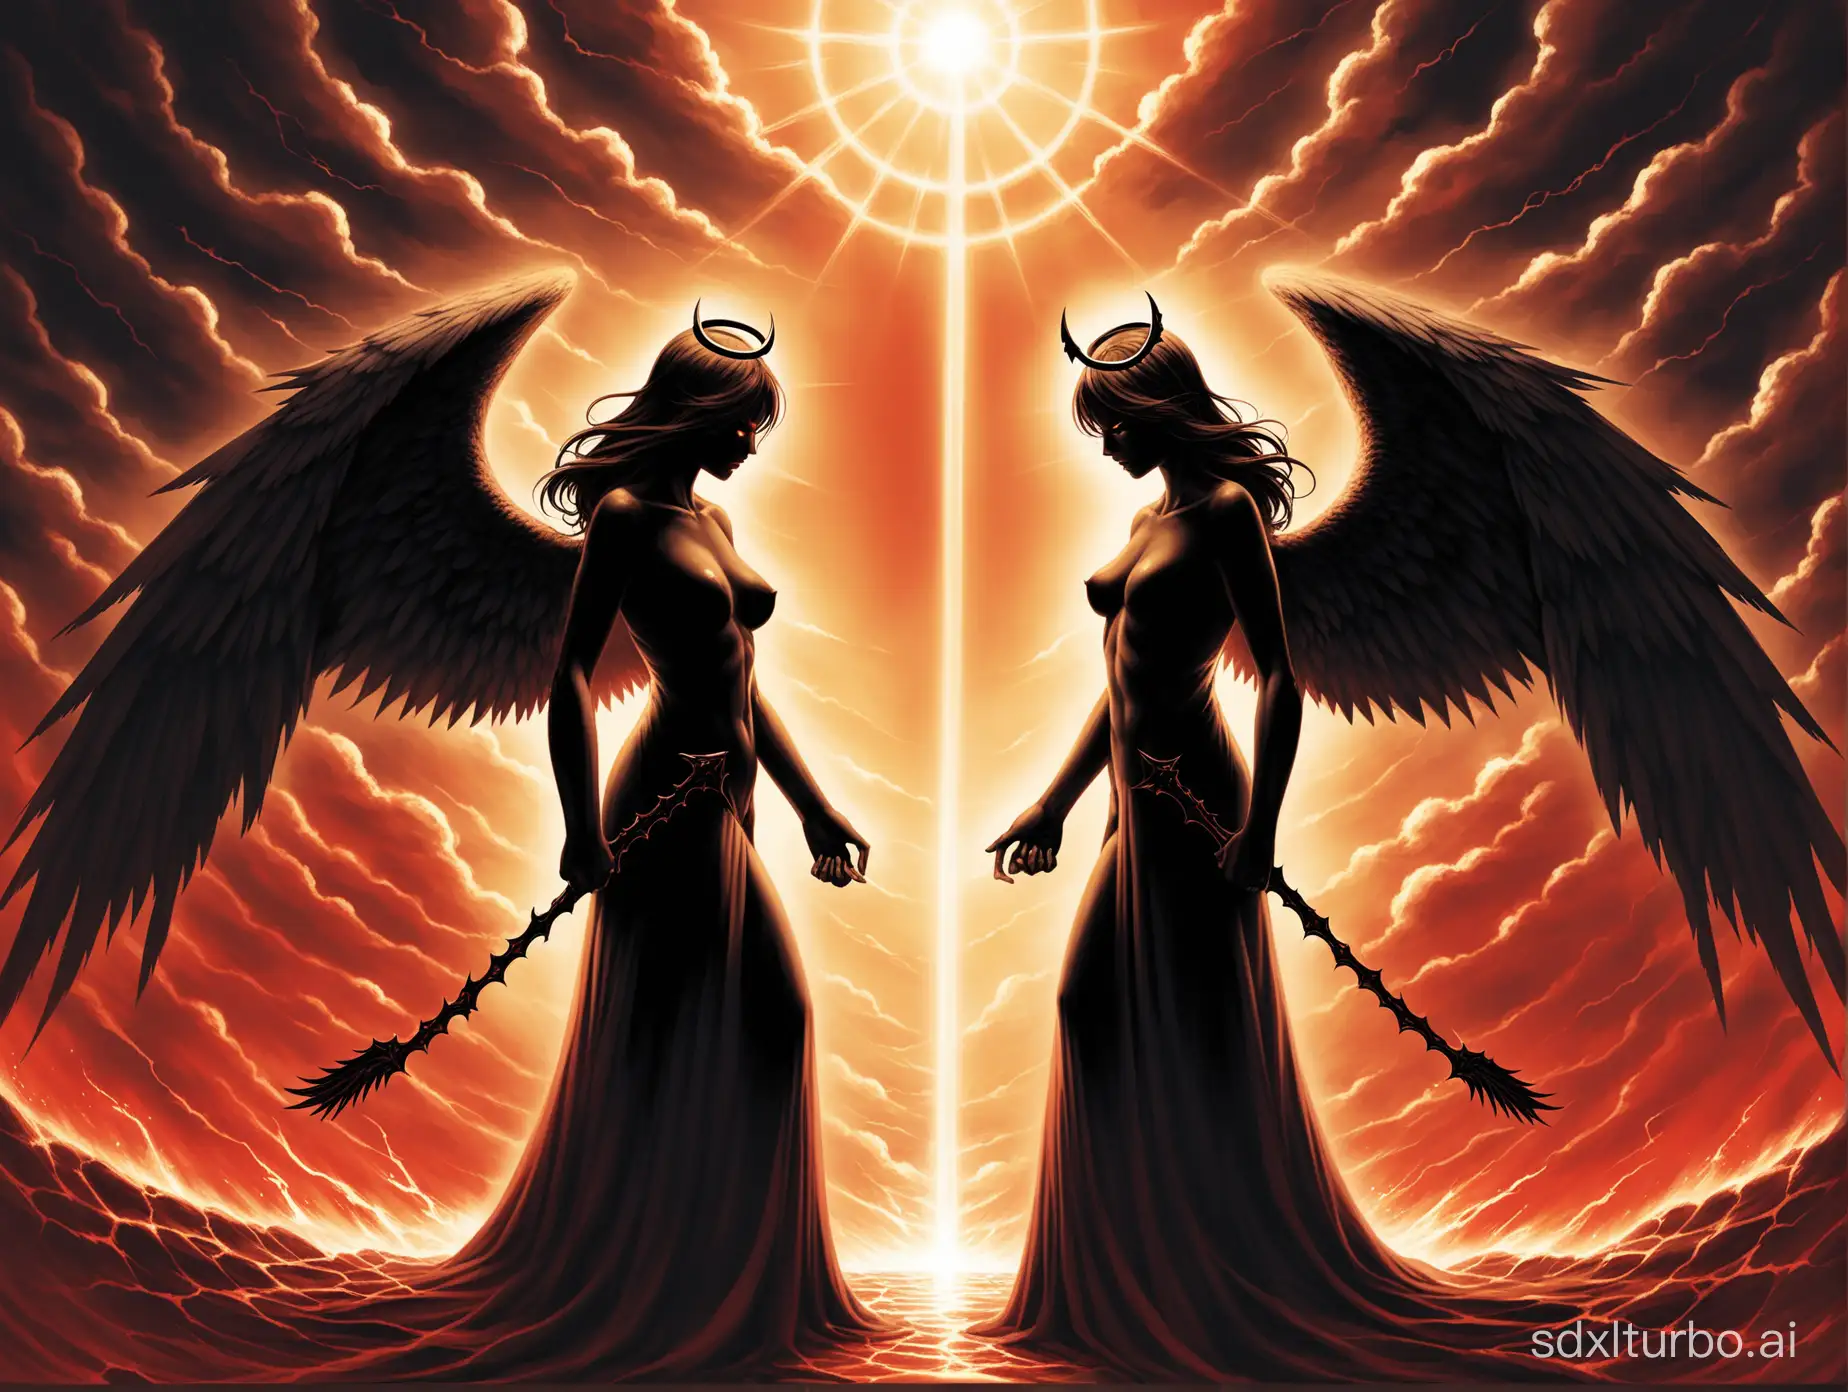 Angels and demons, confronting each other on both sides